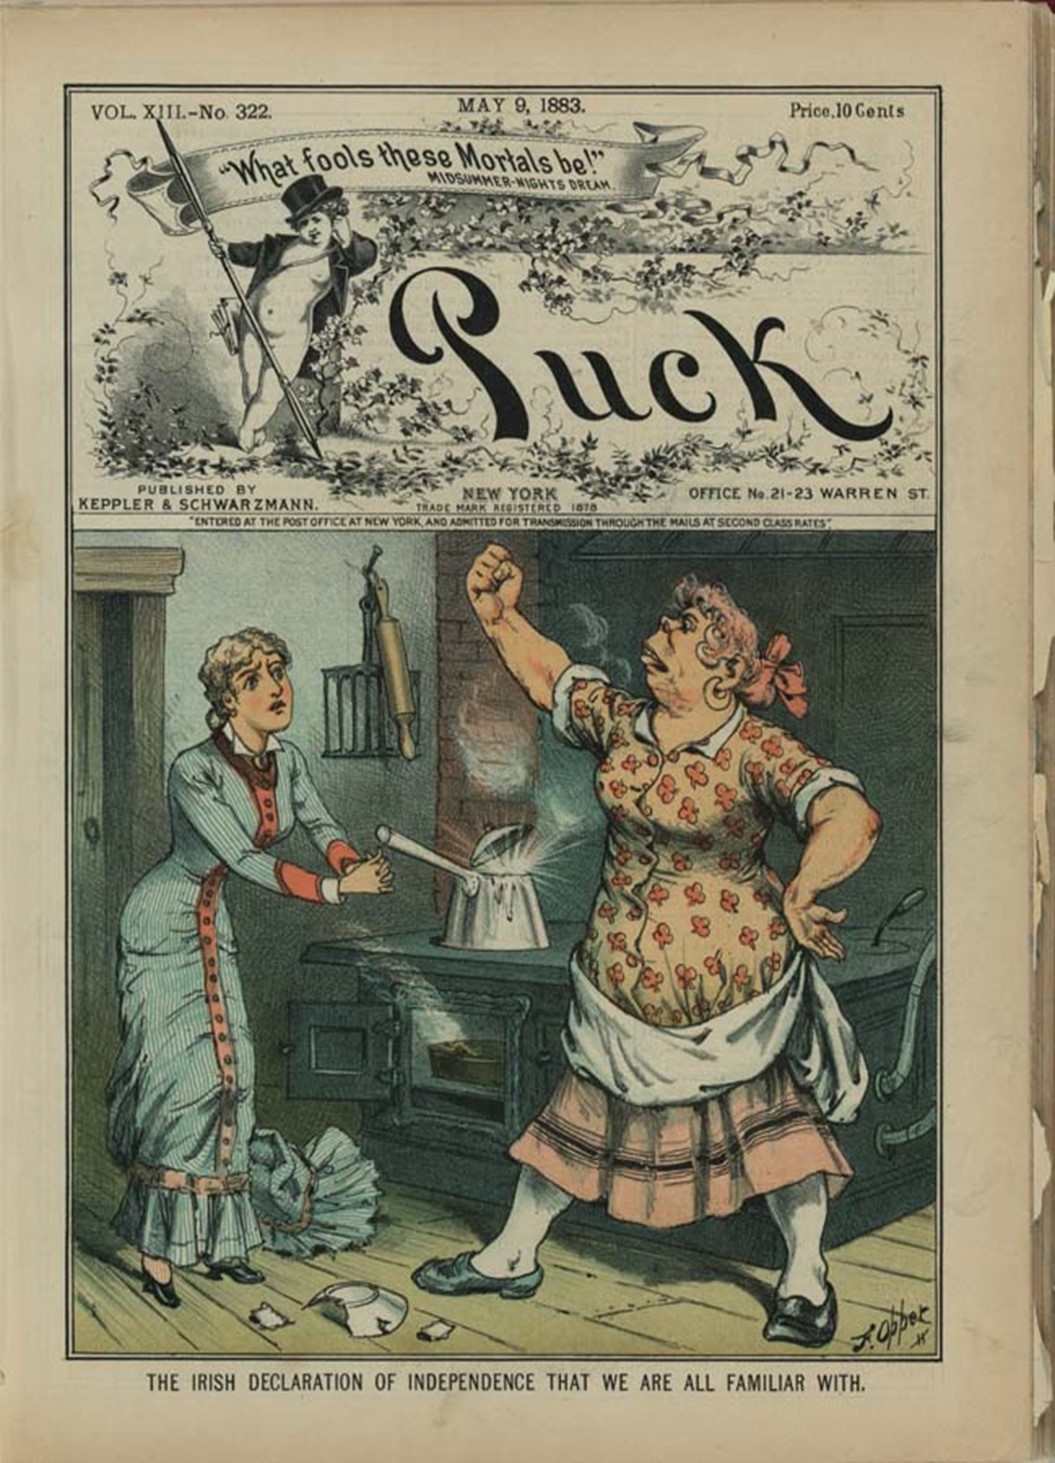 Cartoon depicting a stereotype of an Irish domestic servant challenging her American mistress. Puck Magazine, May 9, 1883.